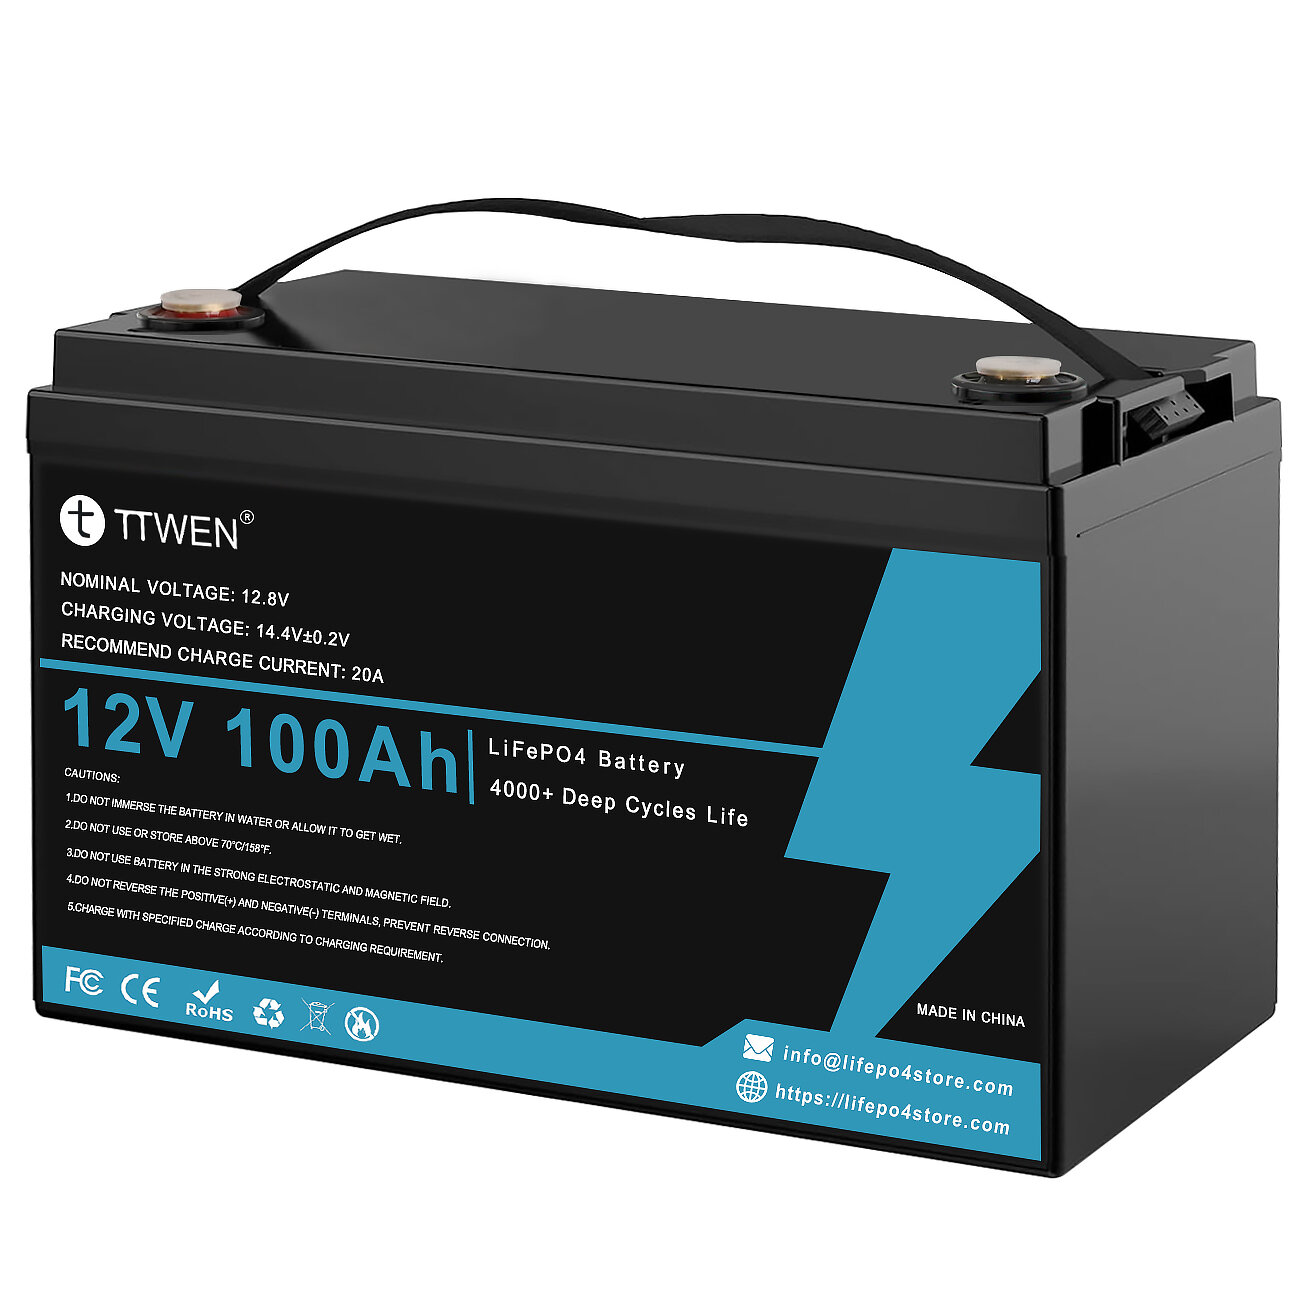 Image of [EU Direct] TTWEN 12V 100Ah Lifepo4 Battery Pack with 100A BMS Temperature Protection 4000+ Times Deep Cycles 1280Wh Lit